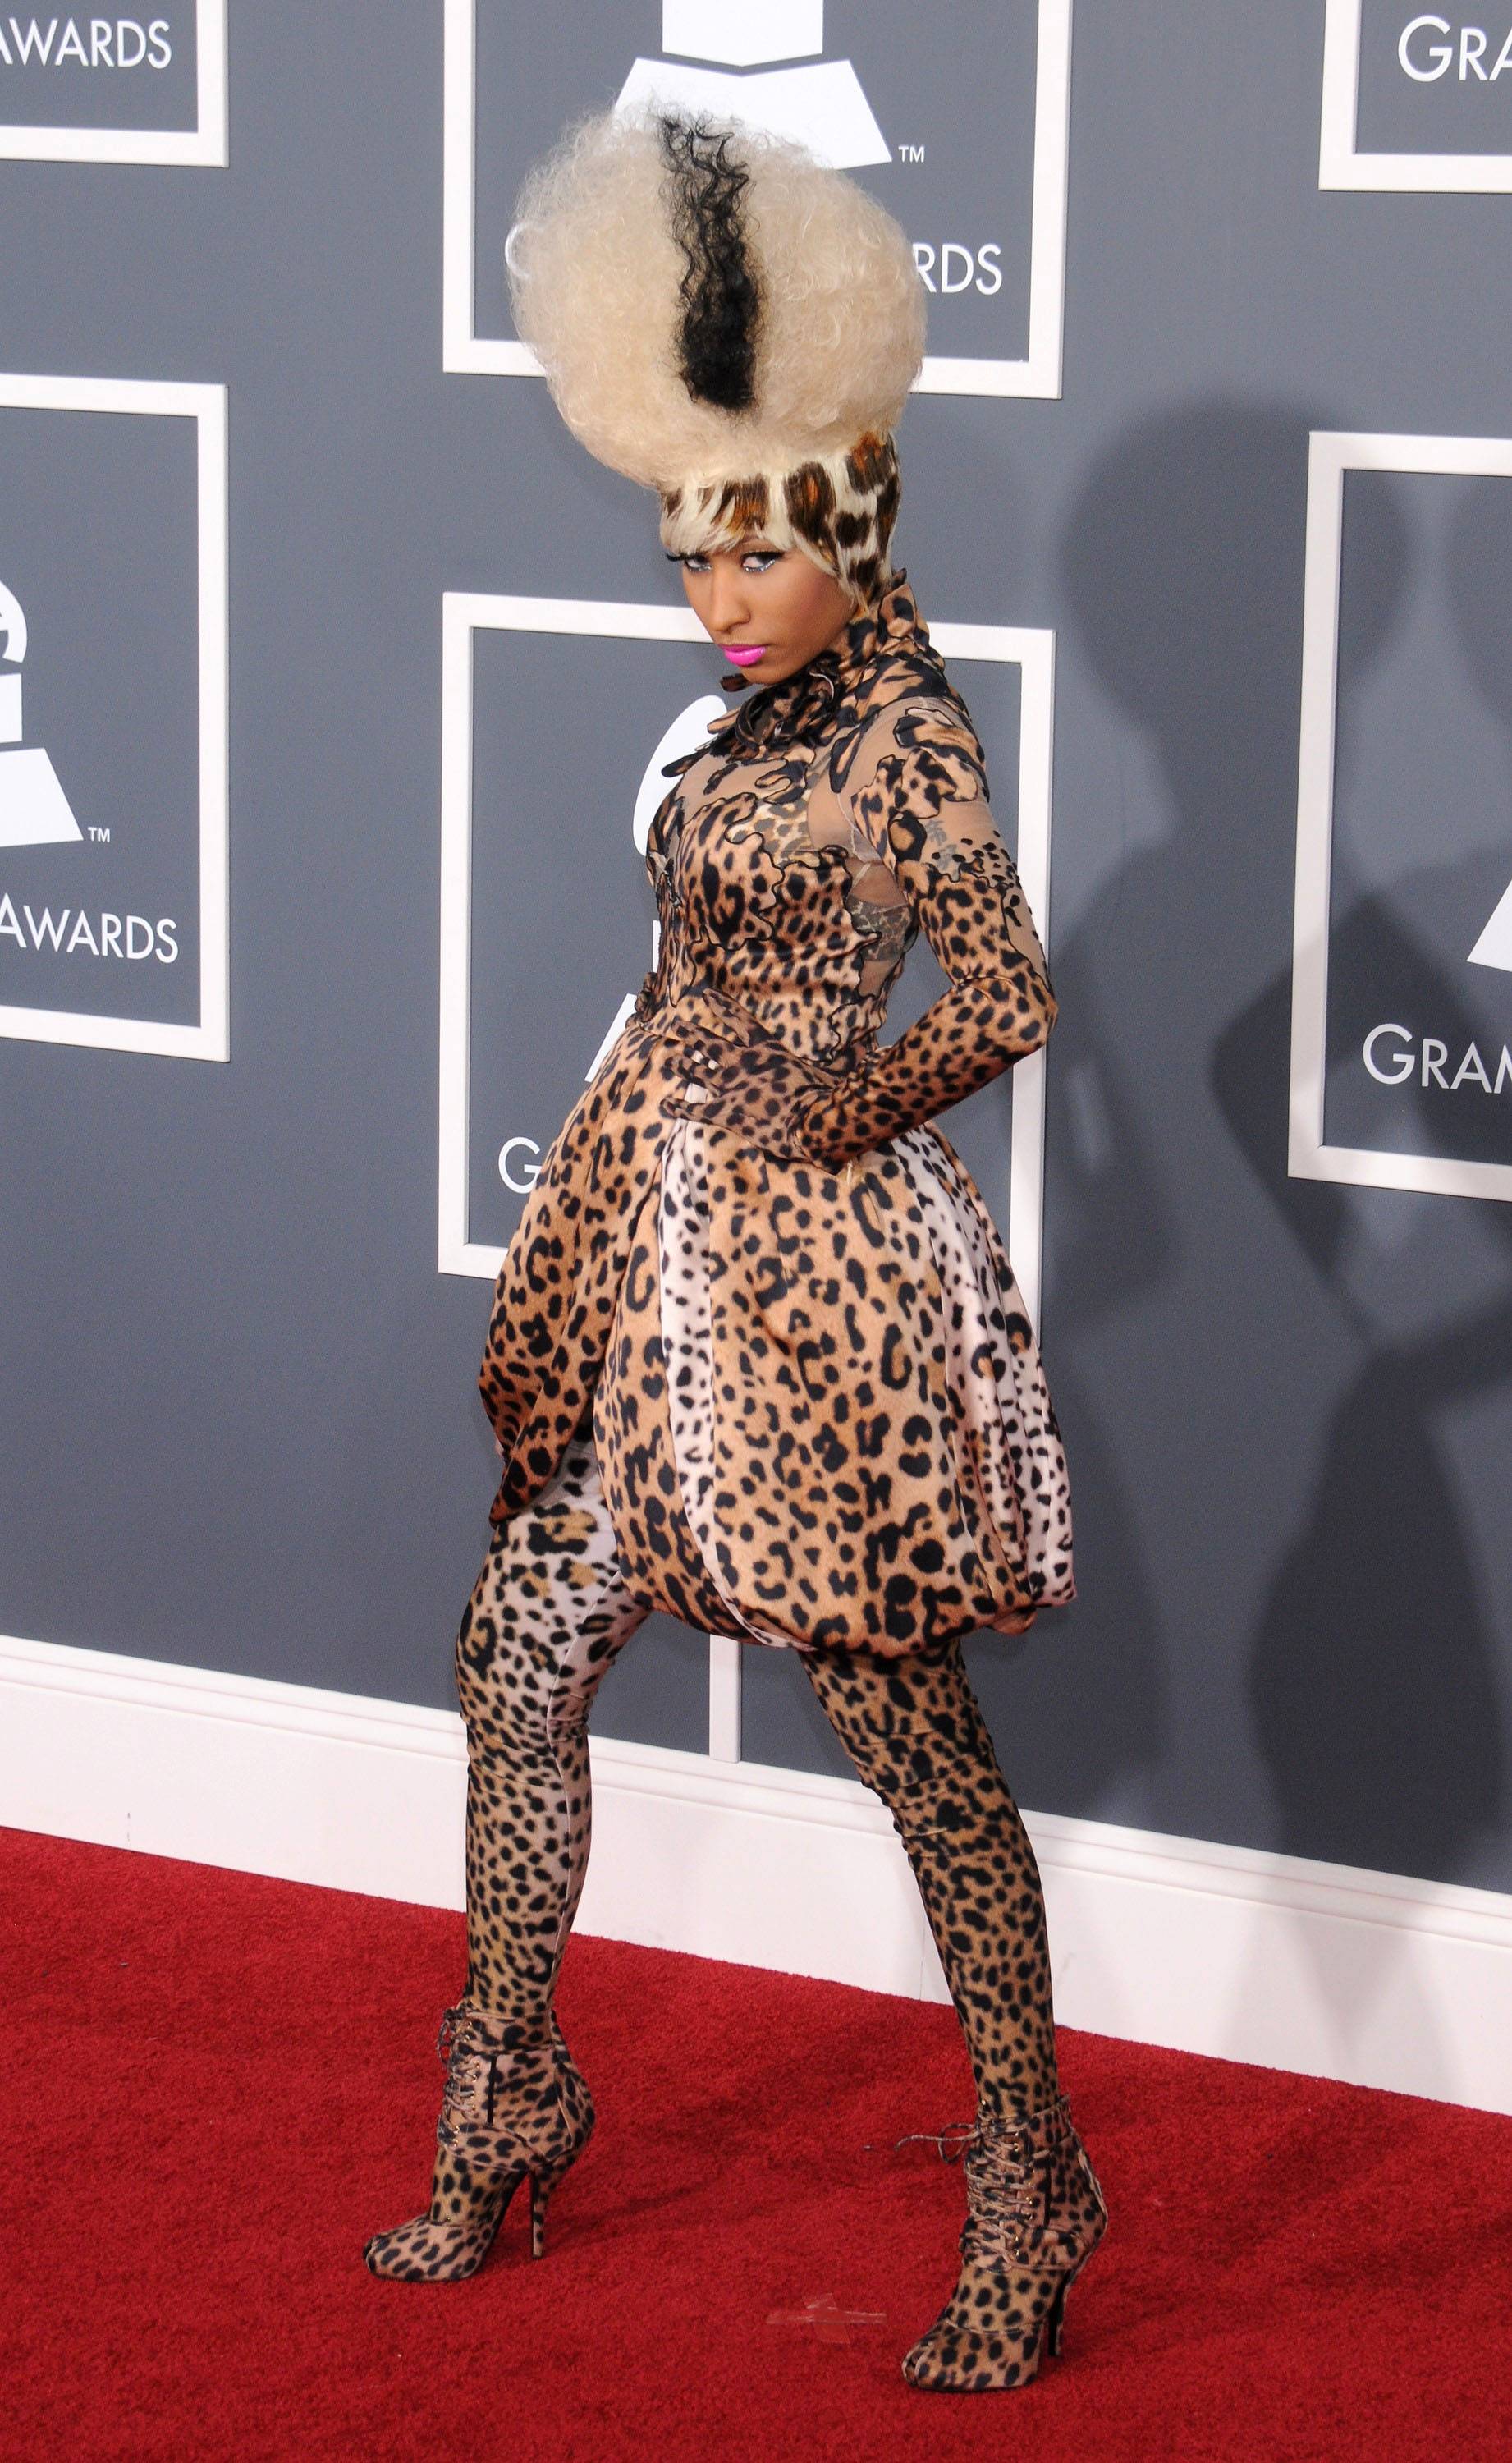 Nicki Minaj - This one was a high-risk miss. Head-to-toe leopard can work. With a little black wig in a pixie cut or a short, blunt bob, this would have been a statement look. But the Cruella de Vil pouf and leopard-spotted wig put it beyond statement and into caricature. Maybe that's what she was going for?Gregg DeGuire/PictureGroup